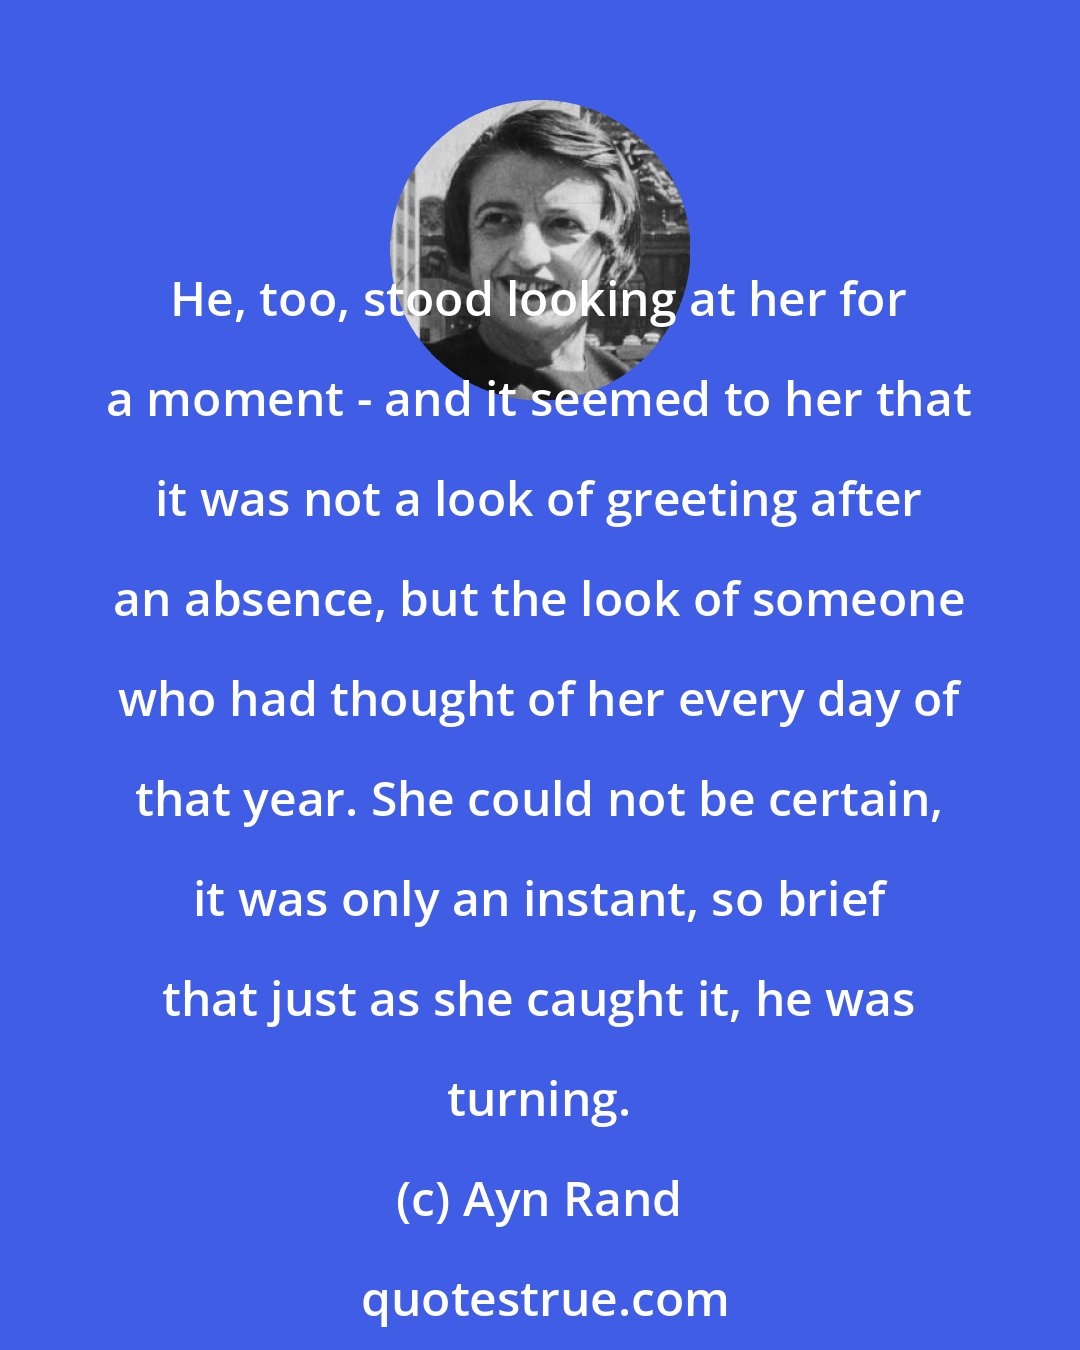 Ayn Rand: He, too, stood looking at her for a moment - and it seemed to her that it was not a look of greeting after an absence, but the look of someone who had thought of her every day of that year. She could not be certain, it was only an instant, so brief that just as she caught it, he was turning.